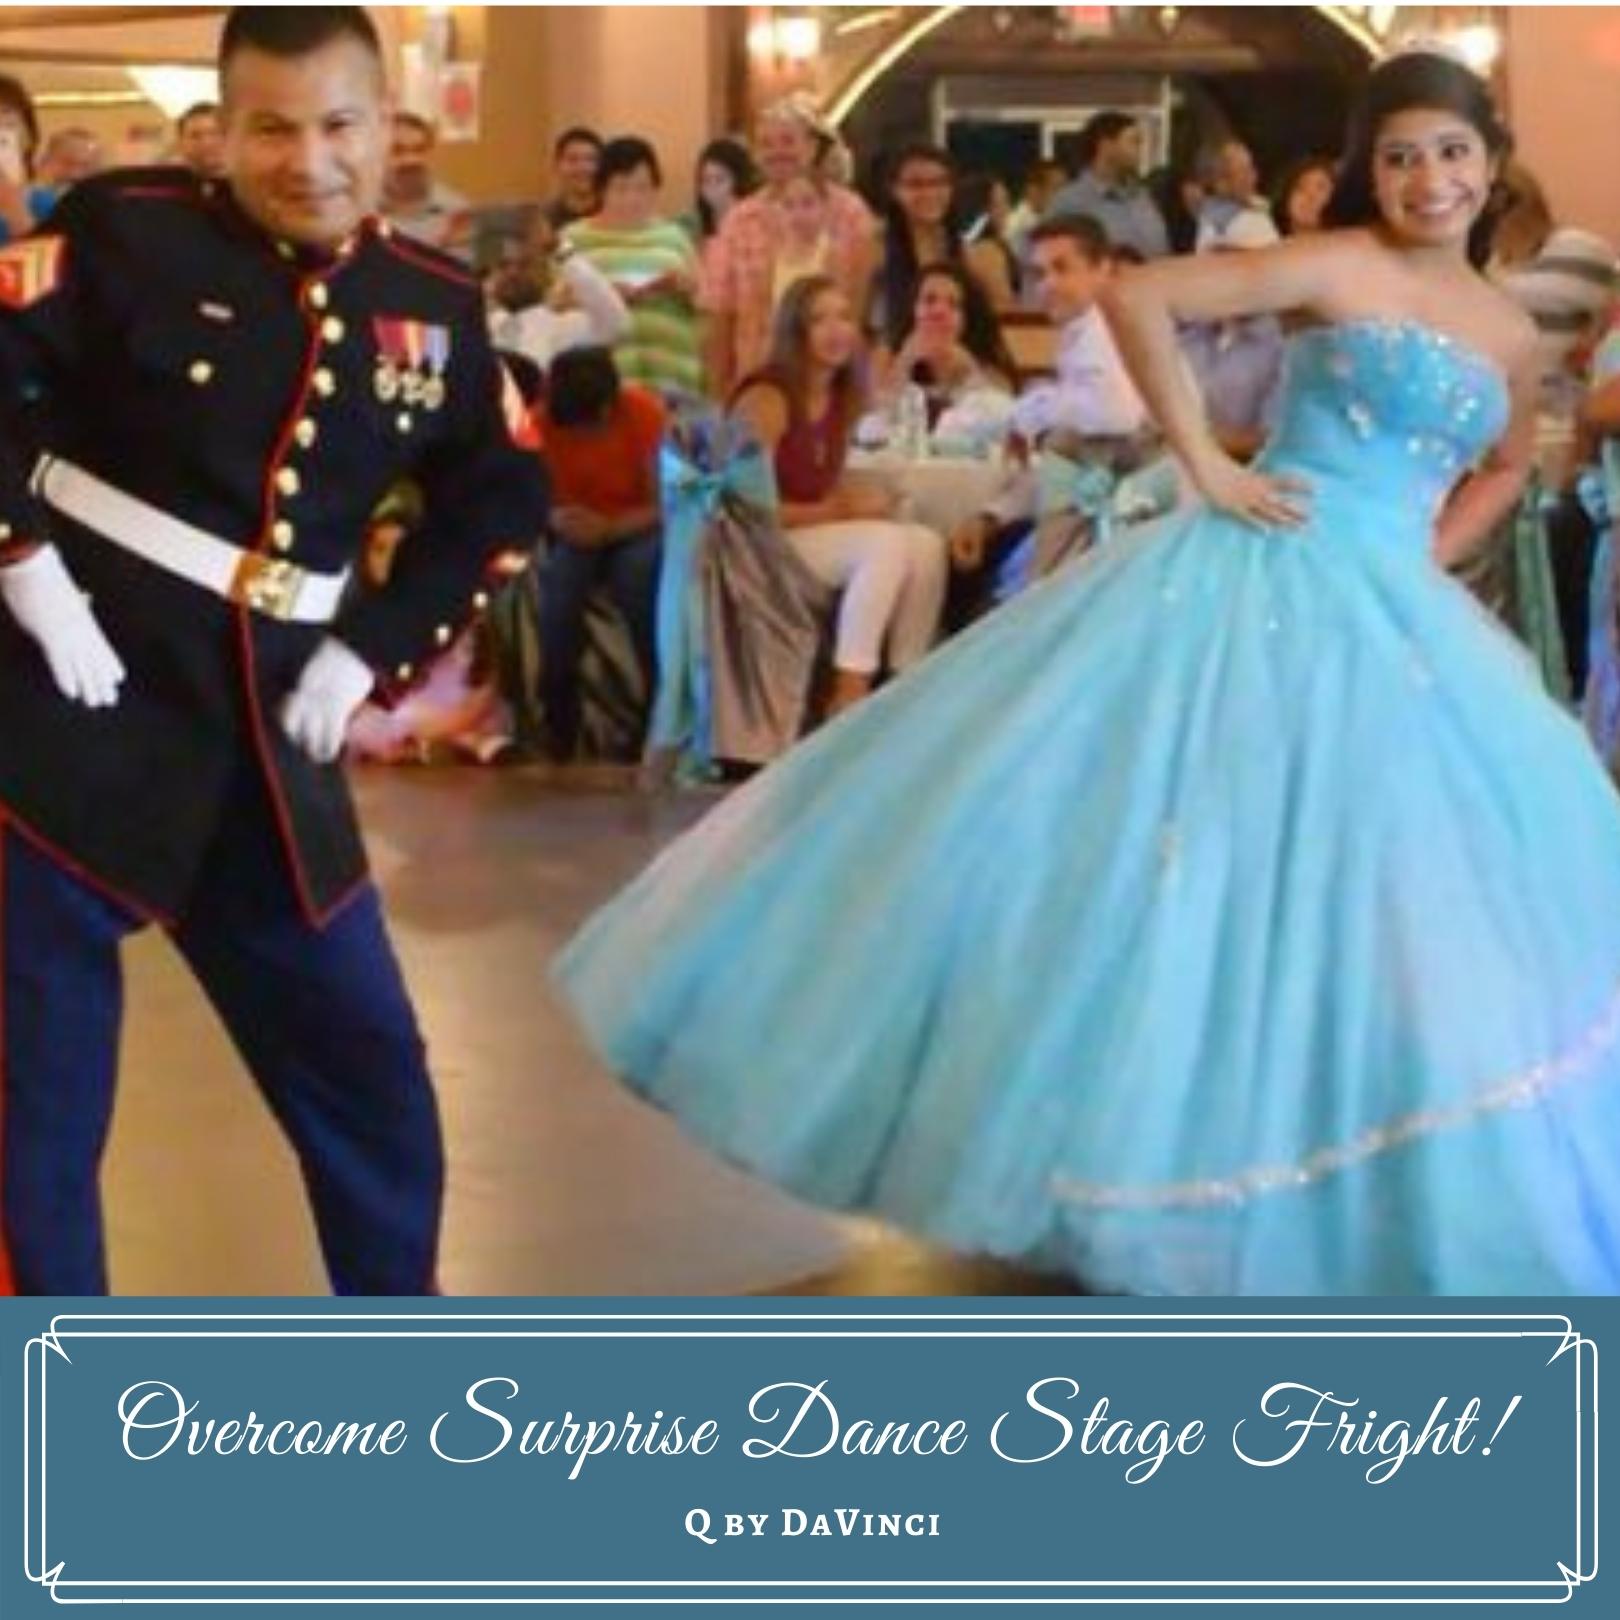 How to Overcome Surprise Dance Stage Fright